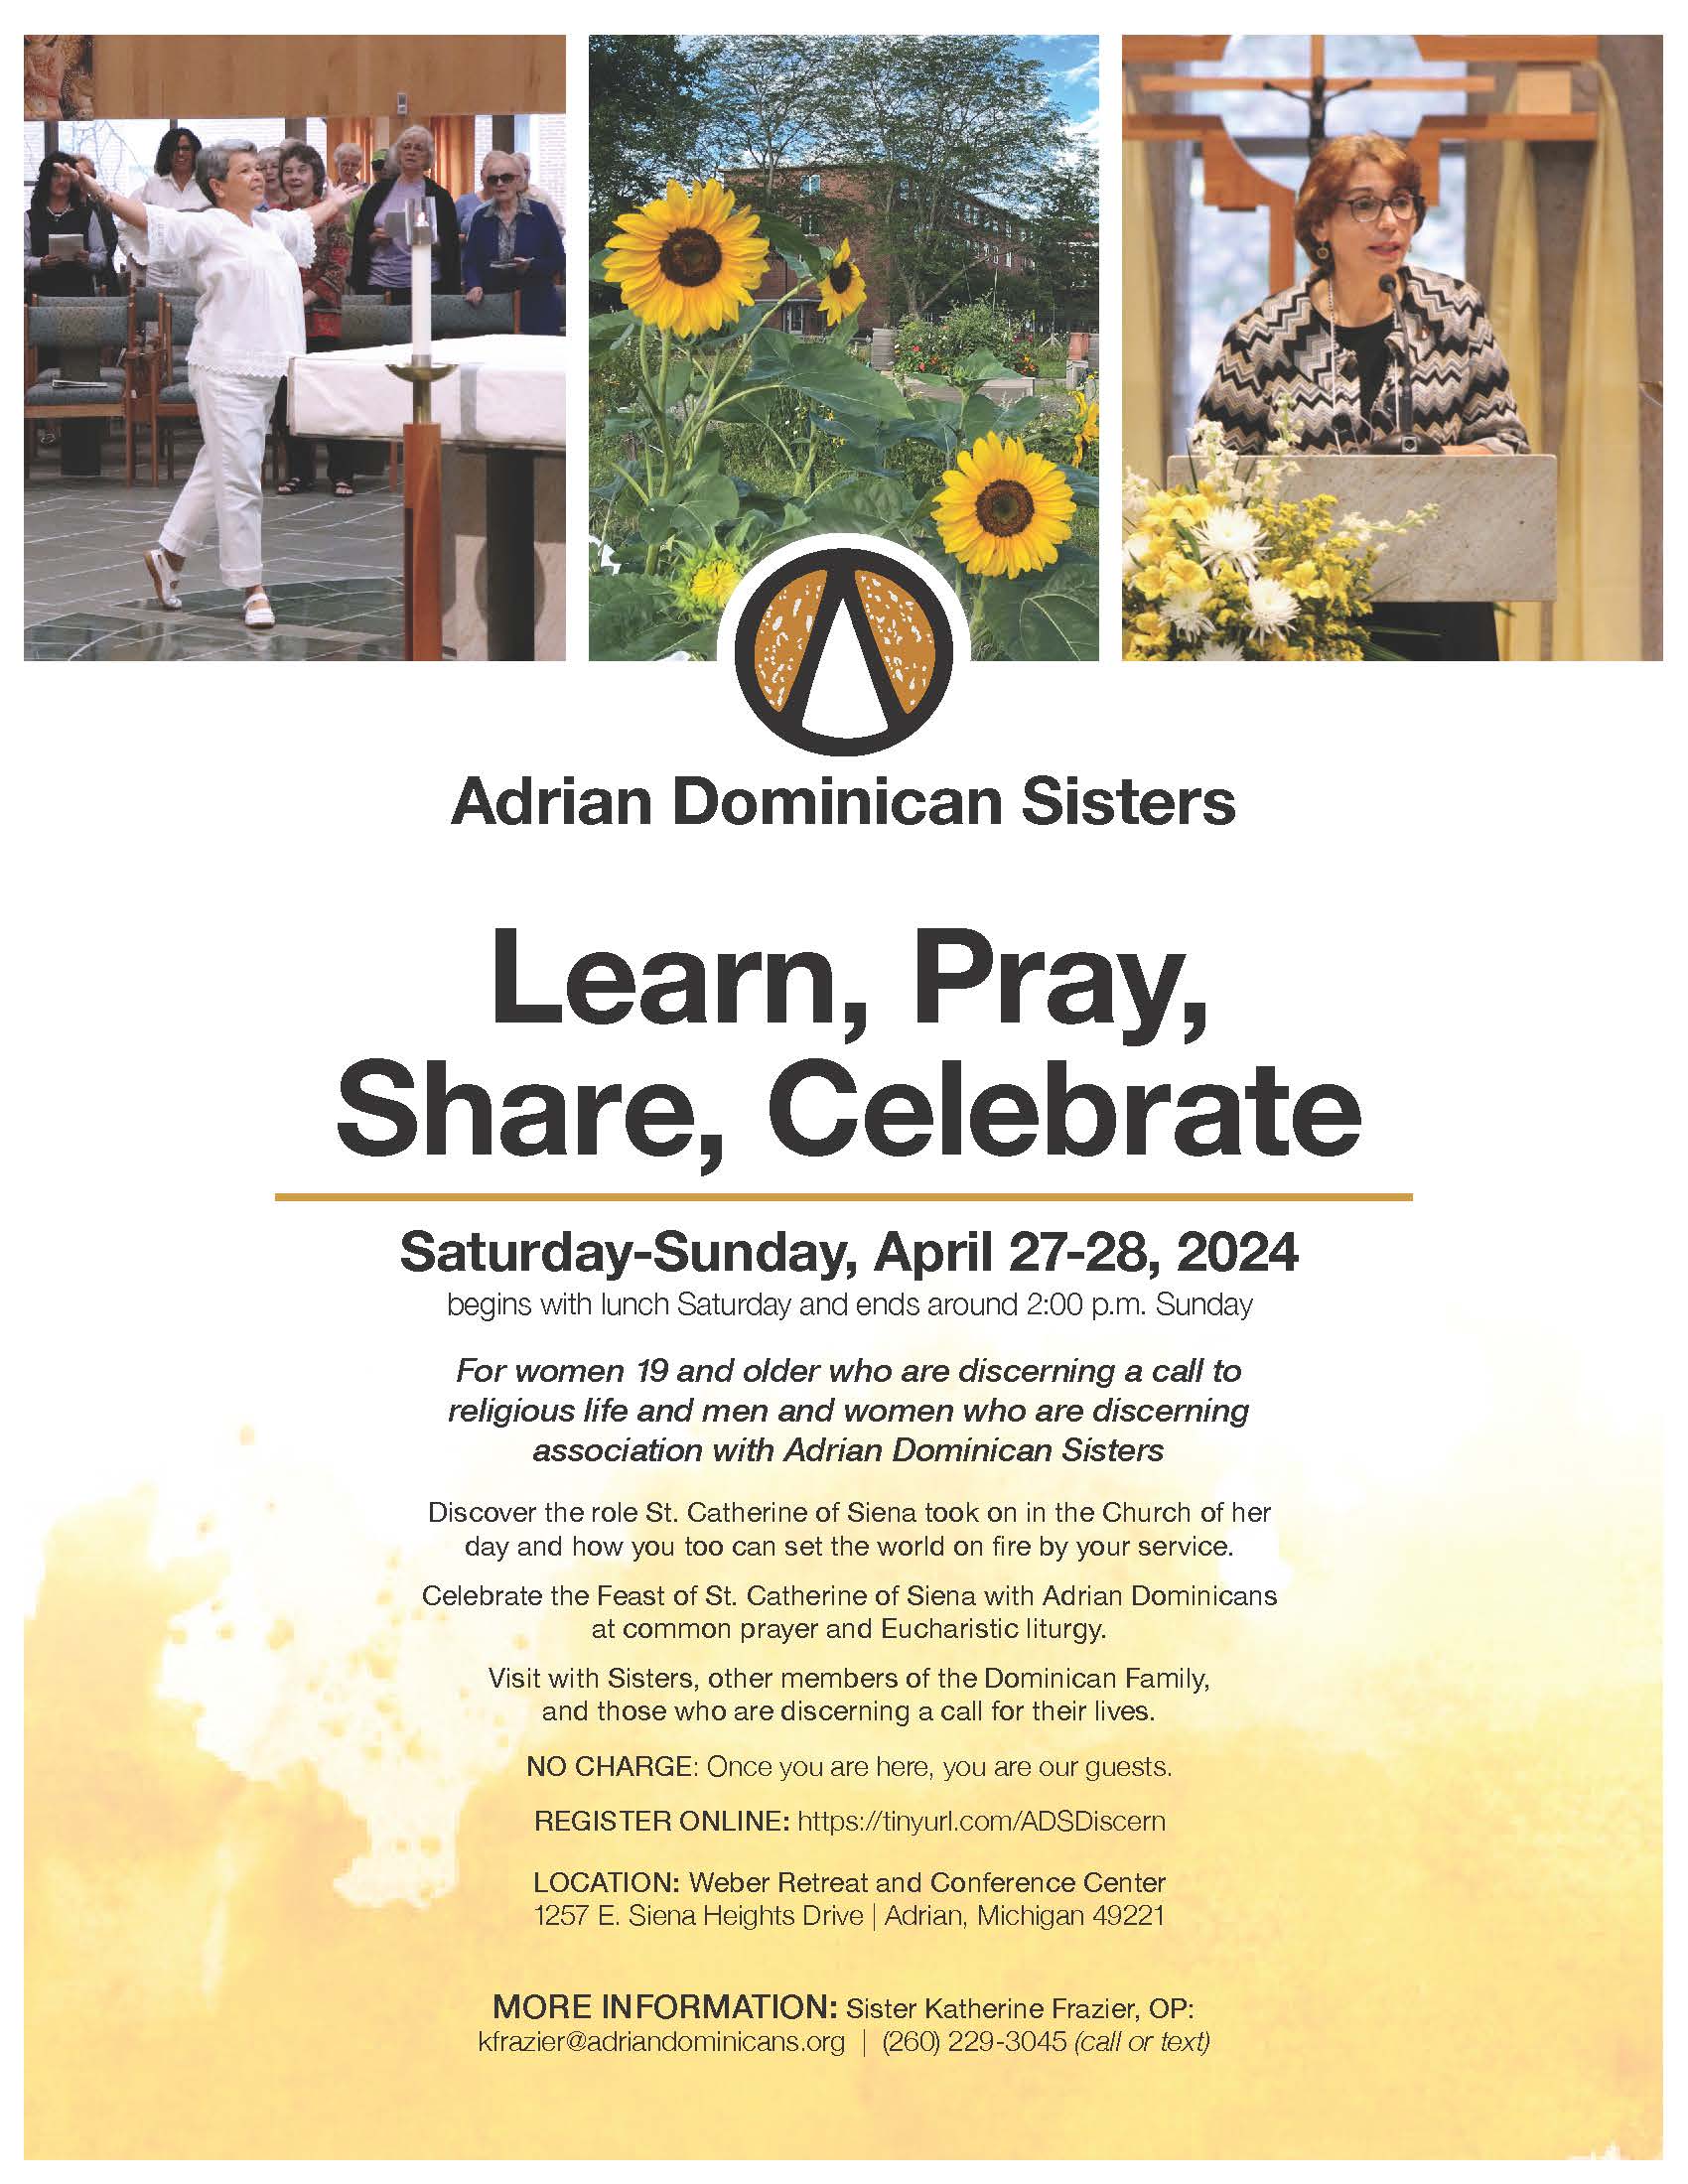 Learn, Pray, Share, Celebrate flyer for April 27-28, 2024